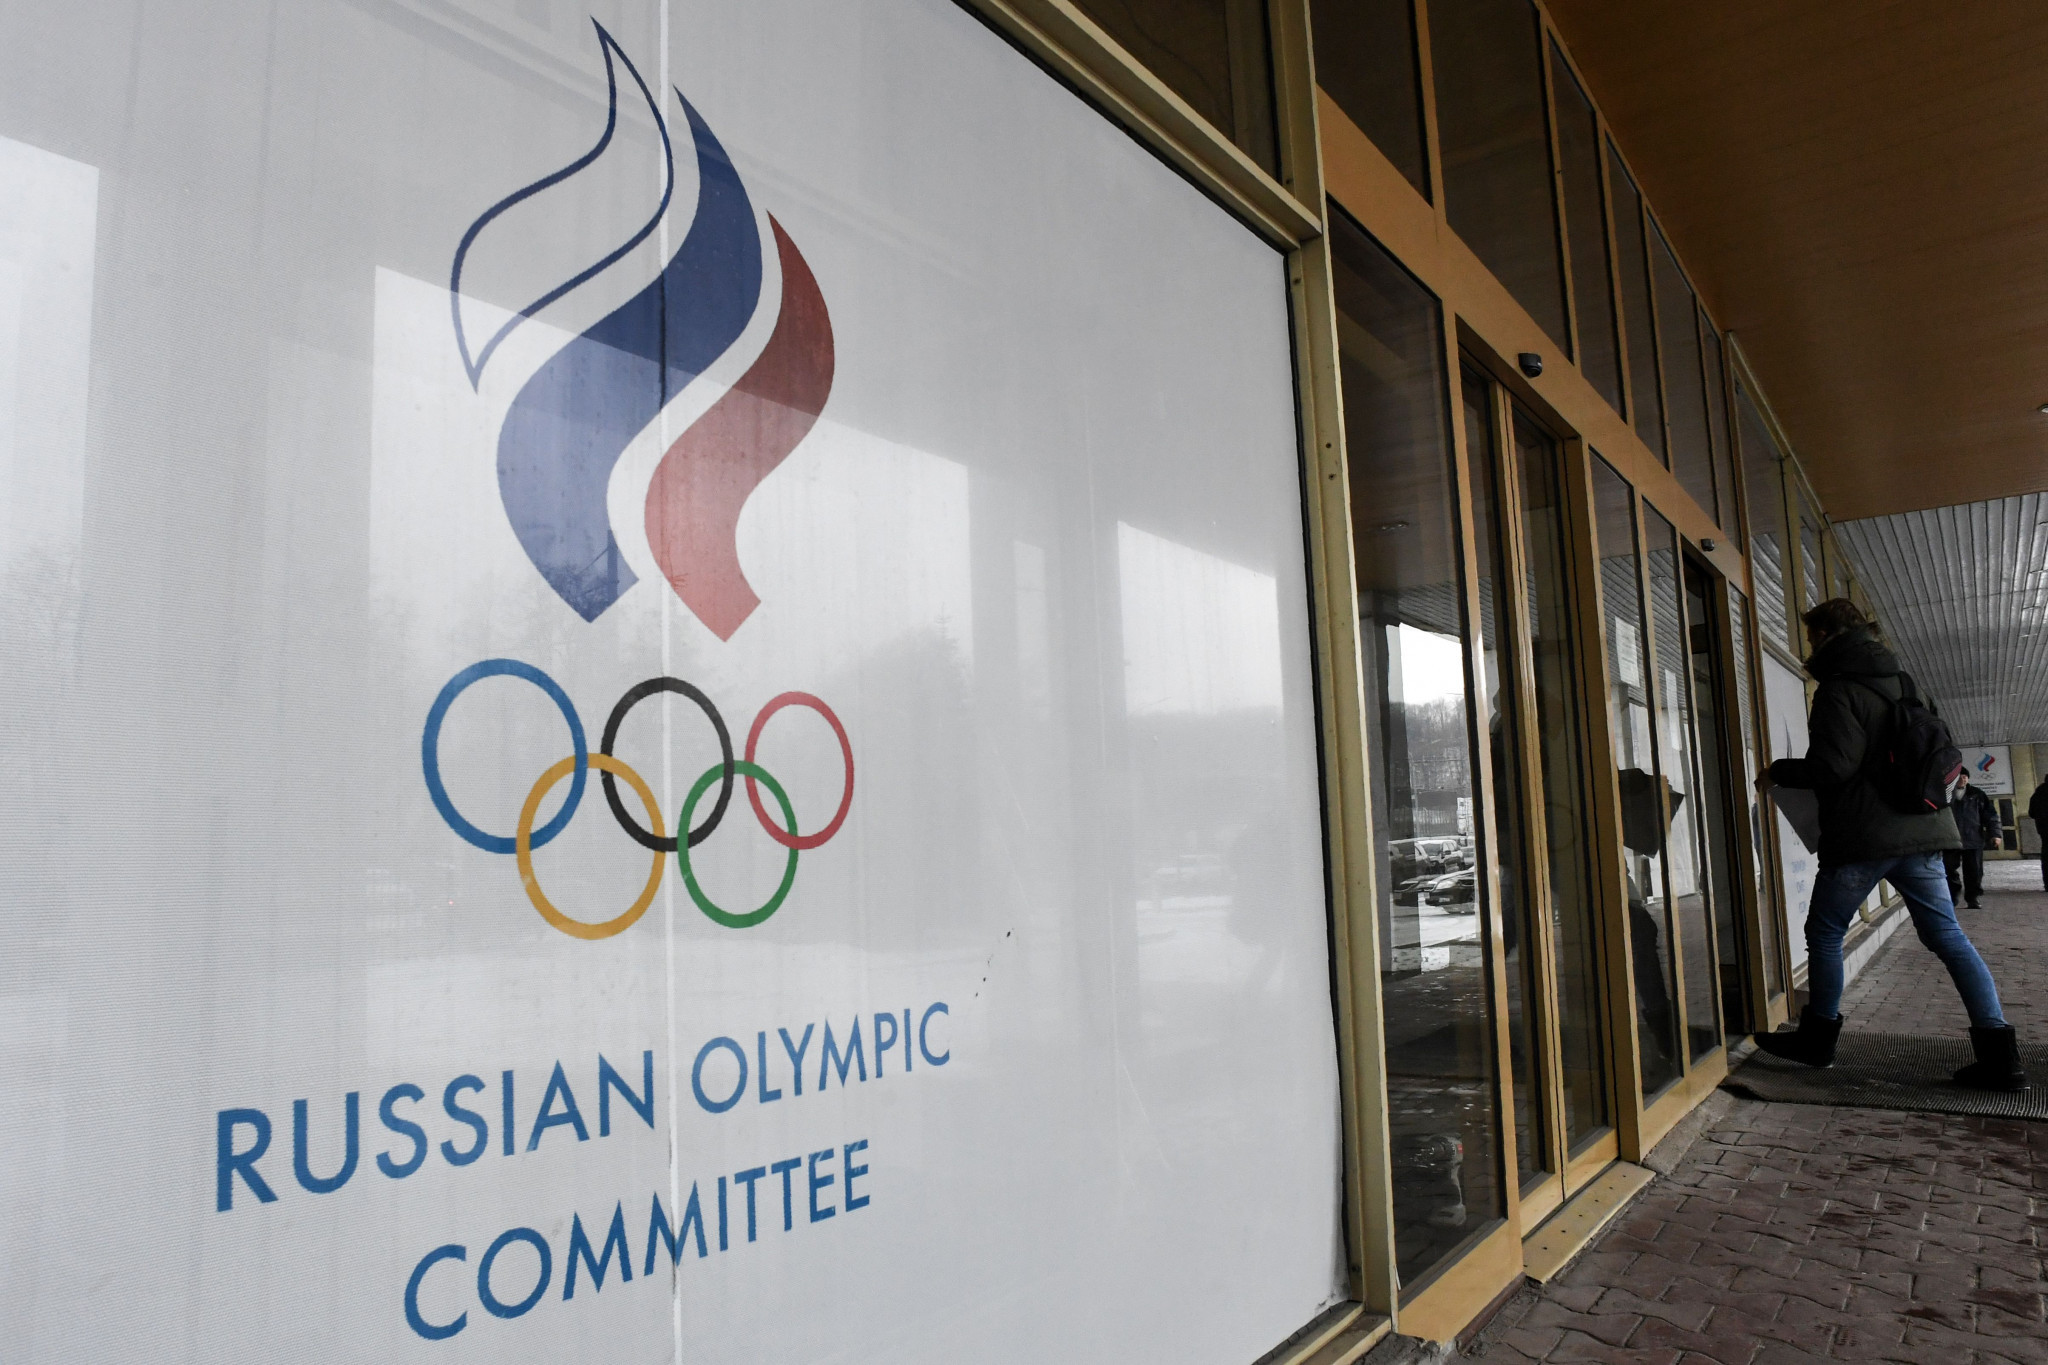 The Russian Olympic Committee still have to pay a $15 million fine imposed on them by the IOC ©Getty Images